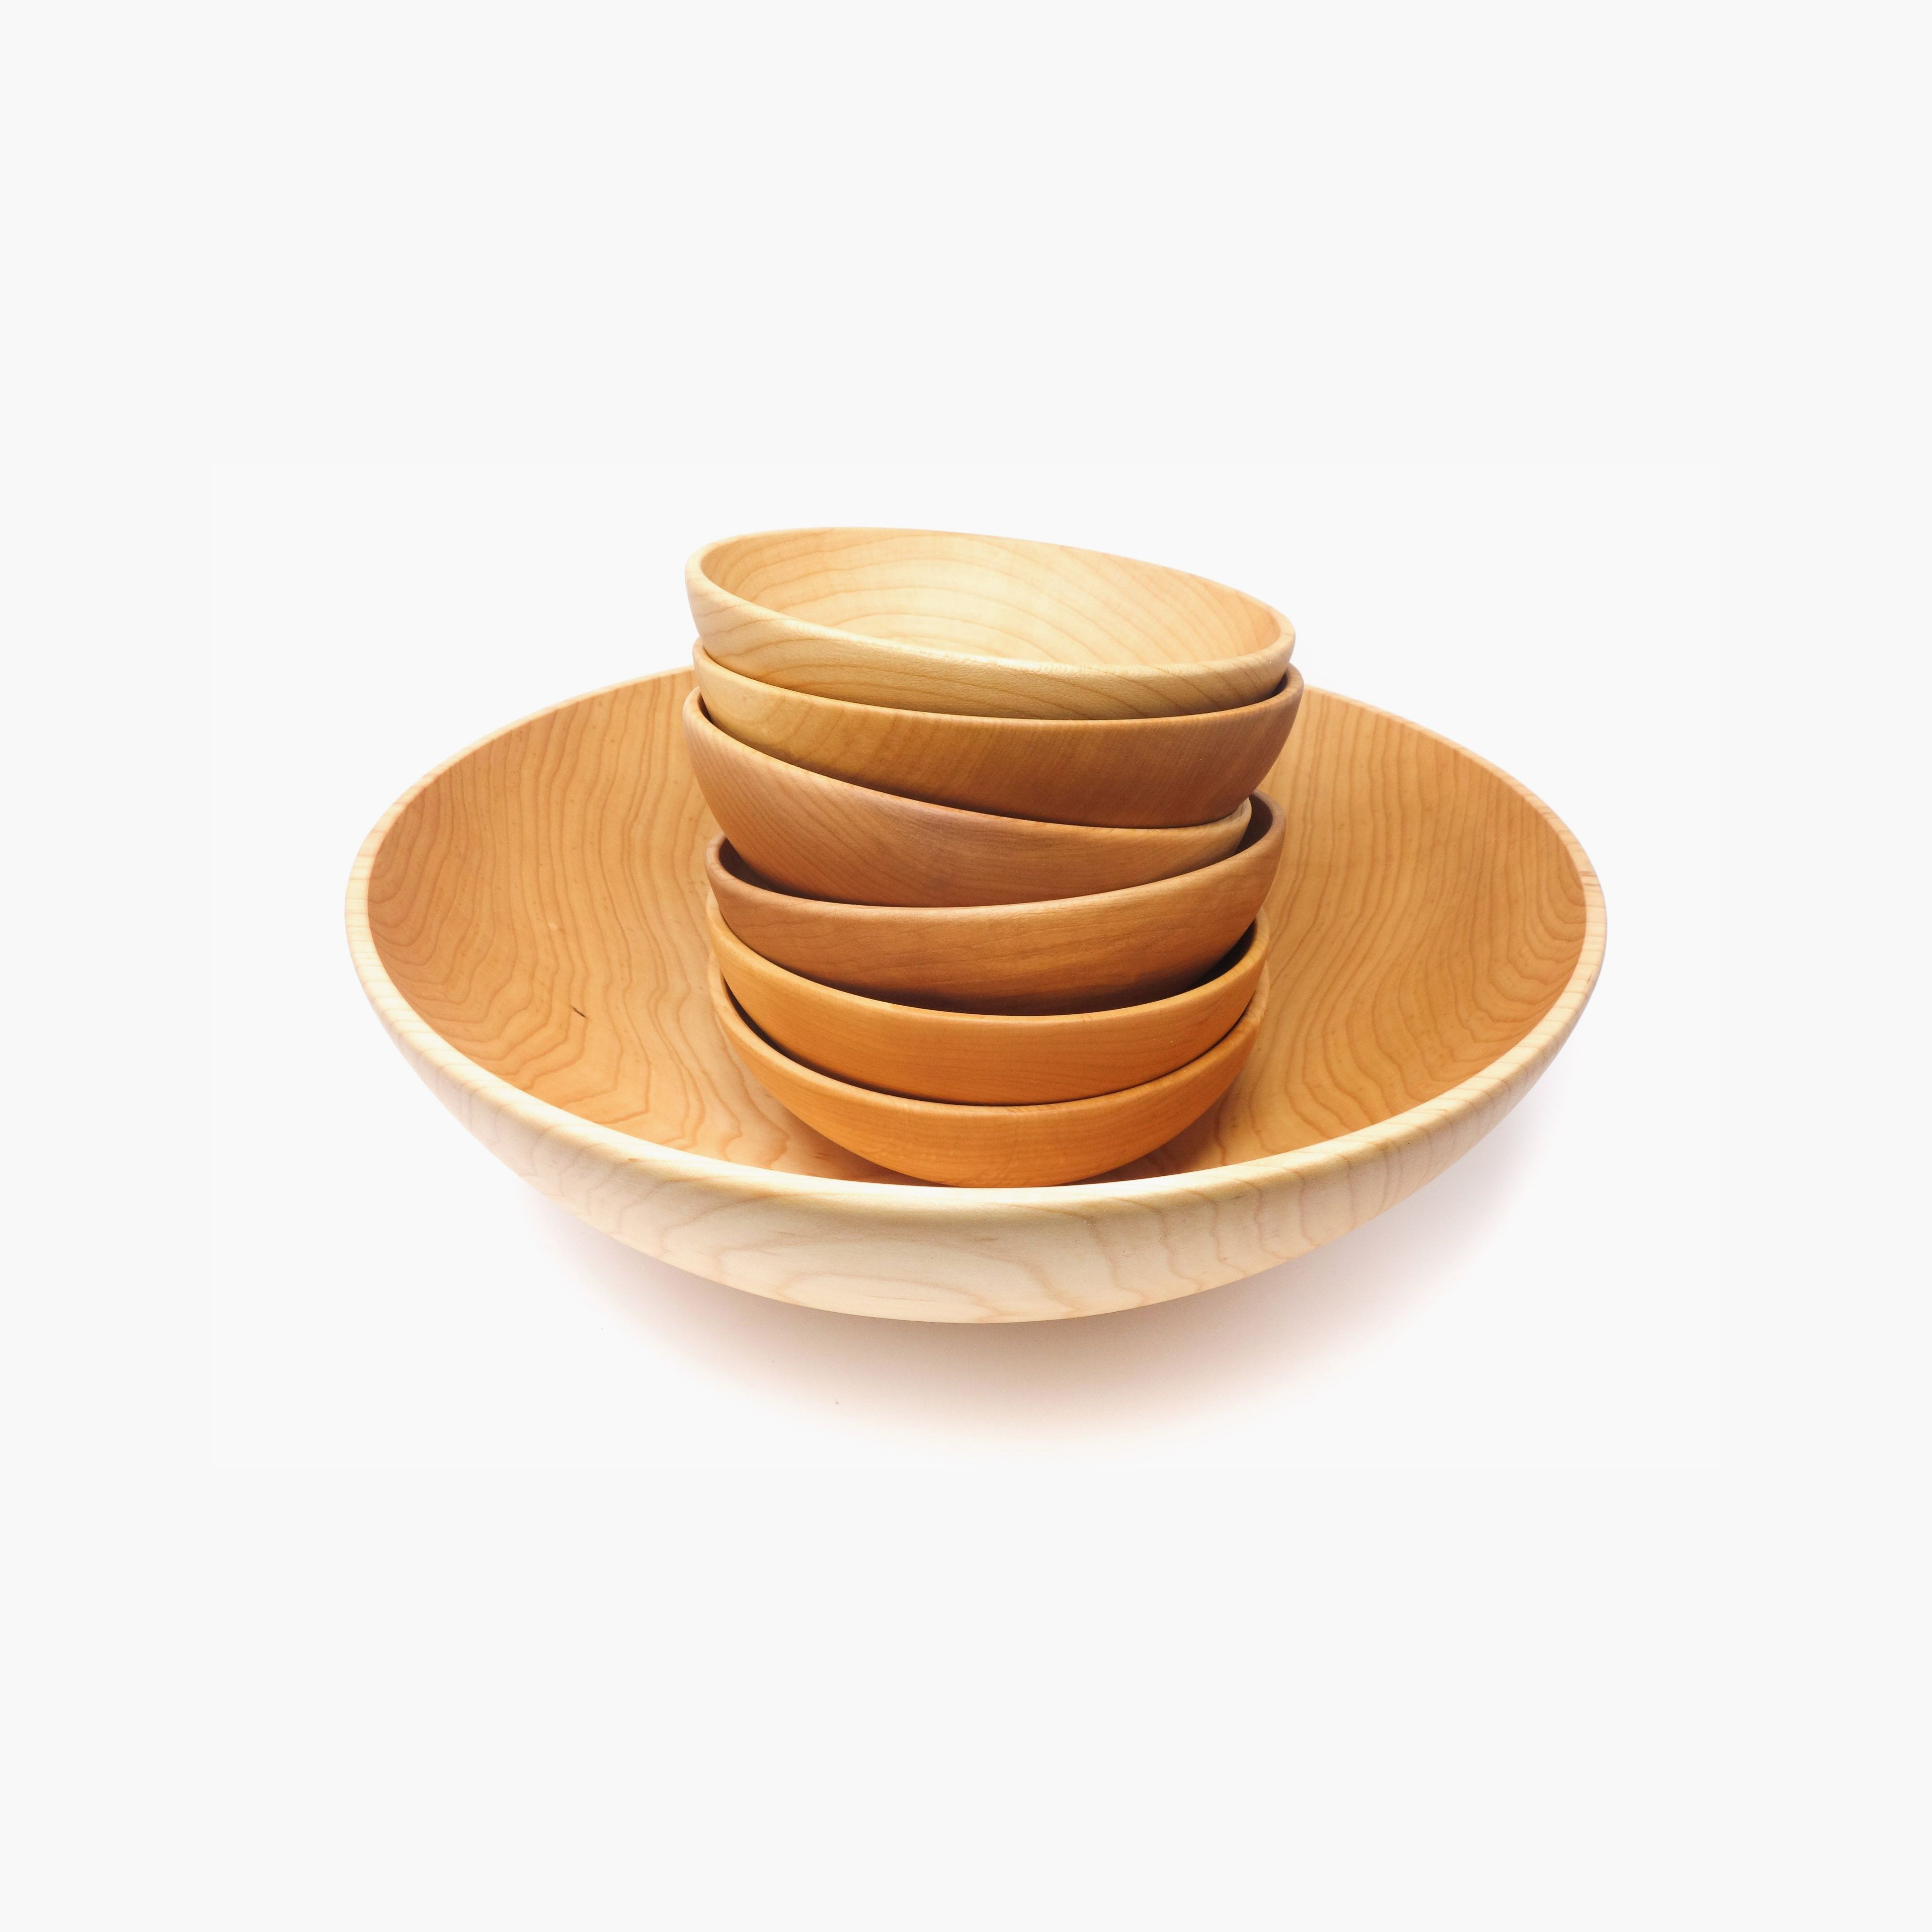 14 Inch Wooden Bowl Set - With 6 Inch Bowls